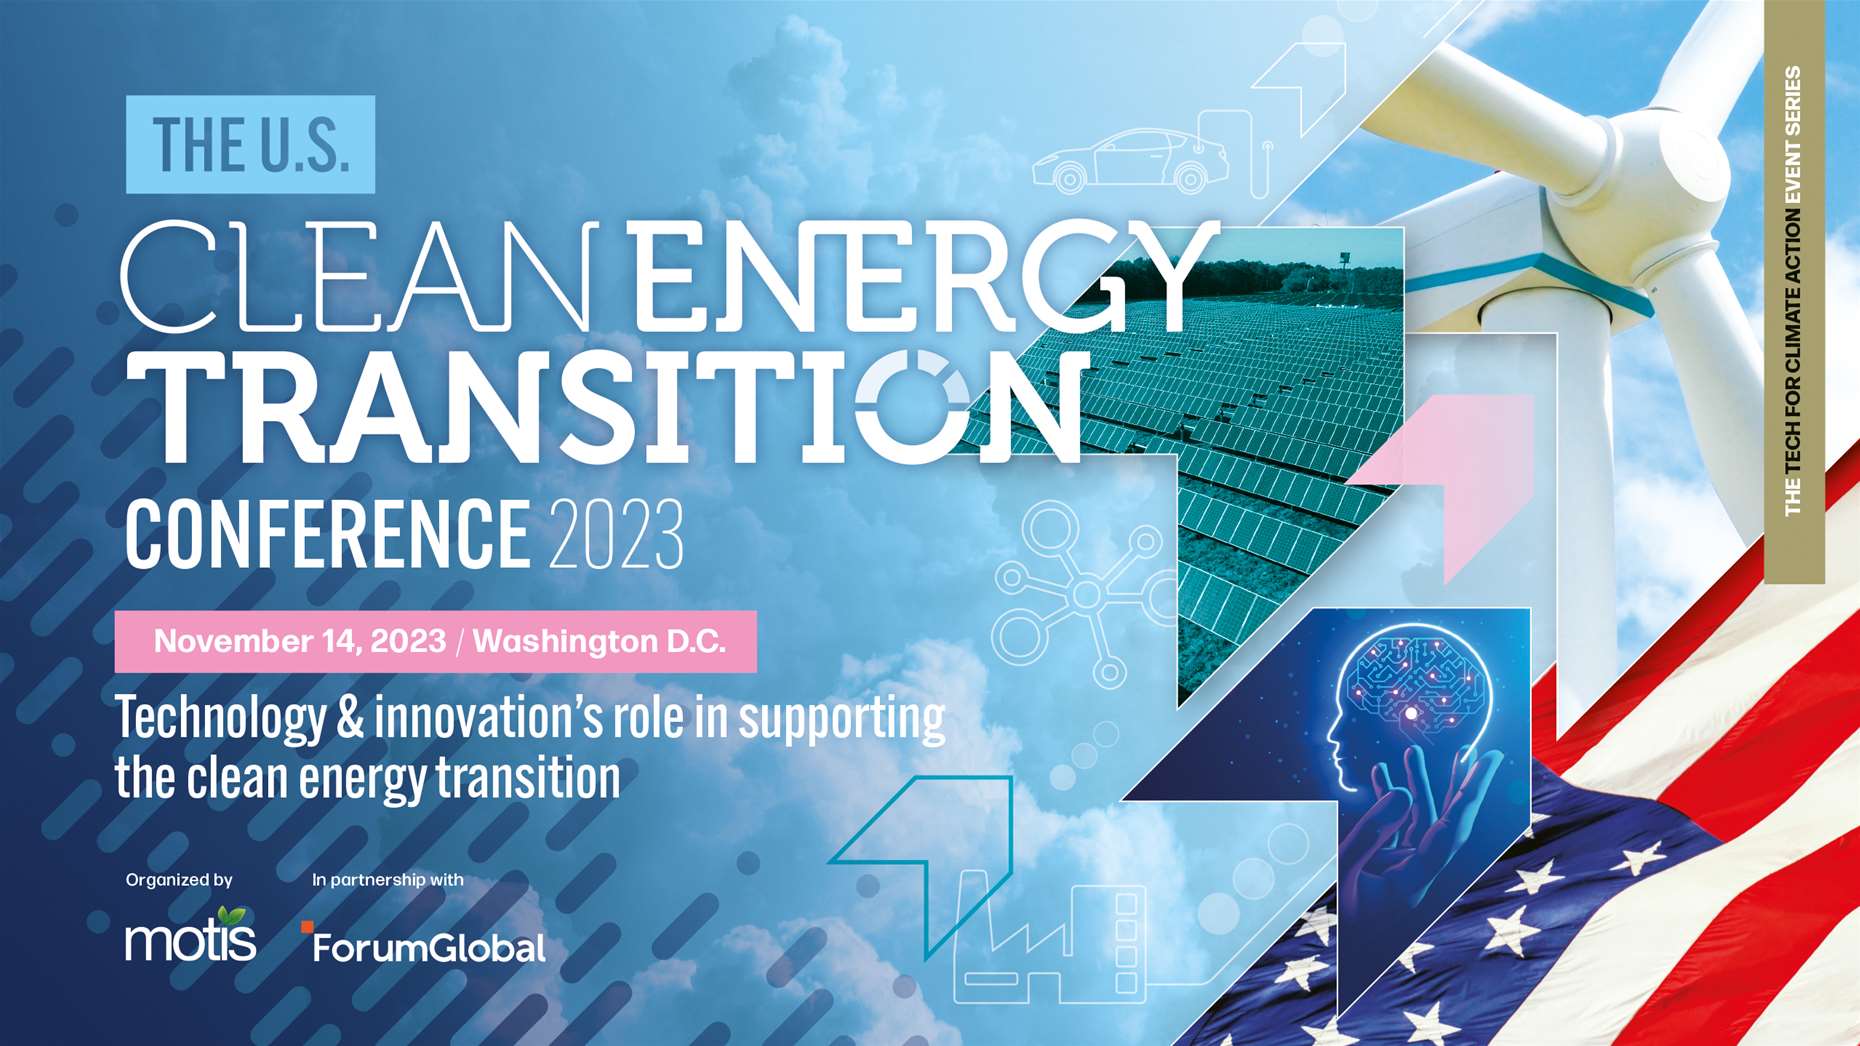 The U.S. Clean Energy Transition conference